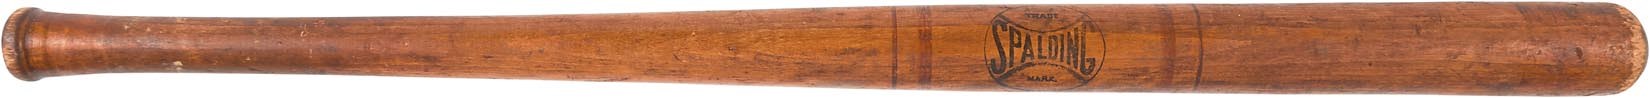 Early Baseball - 1880s Spalding Monstrous "Fat Barrel" Bat (Samuel M. Chase Collection)